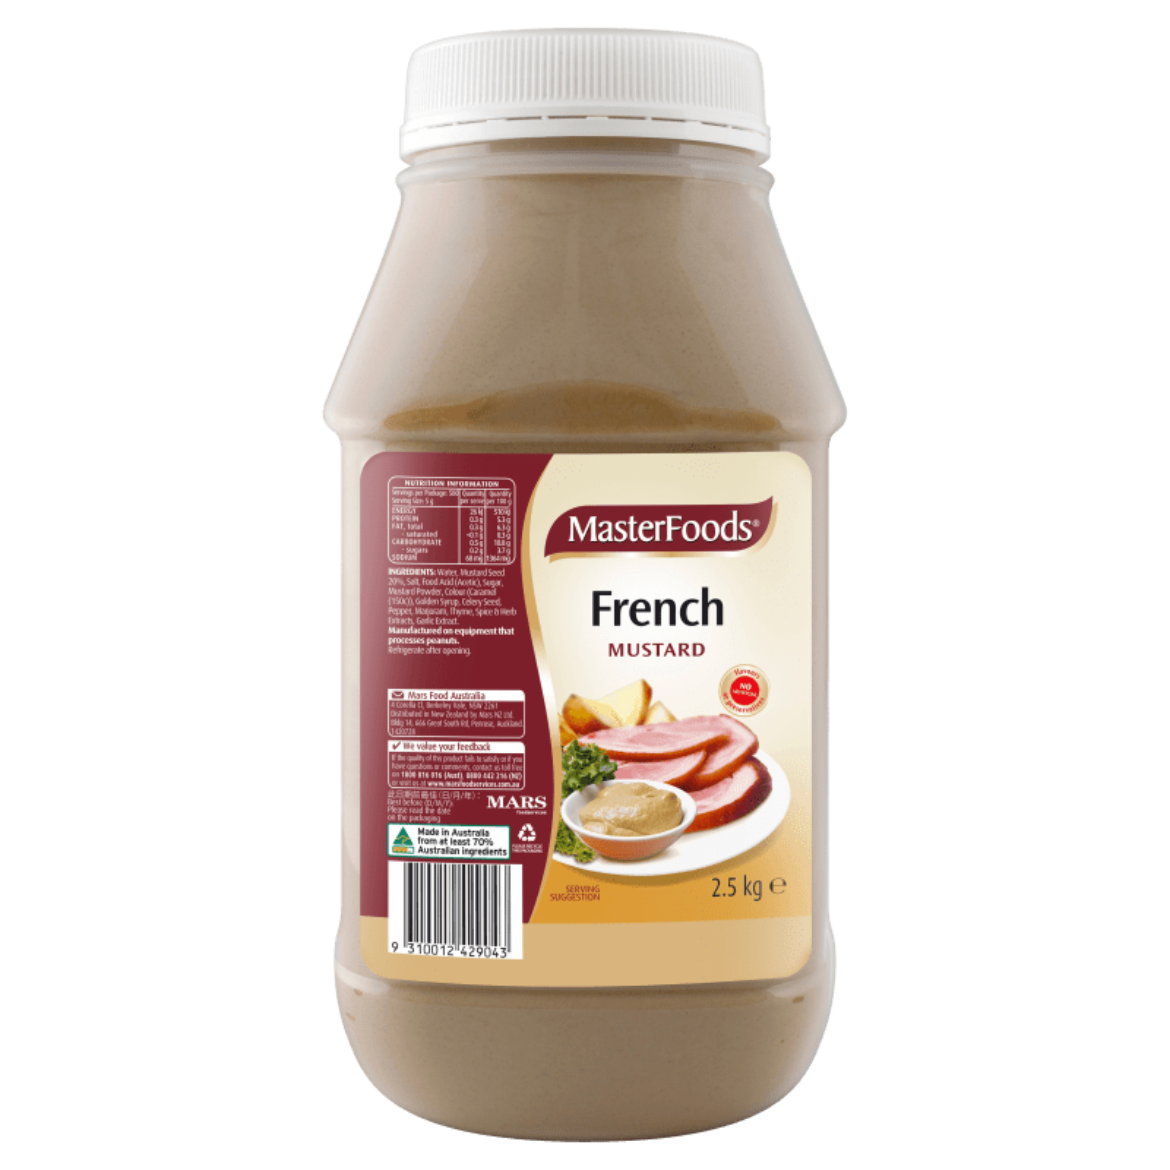 Picture of 2.5KG M/FOODS MUSTARD FRENCH